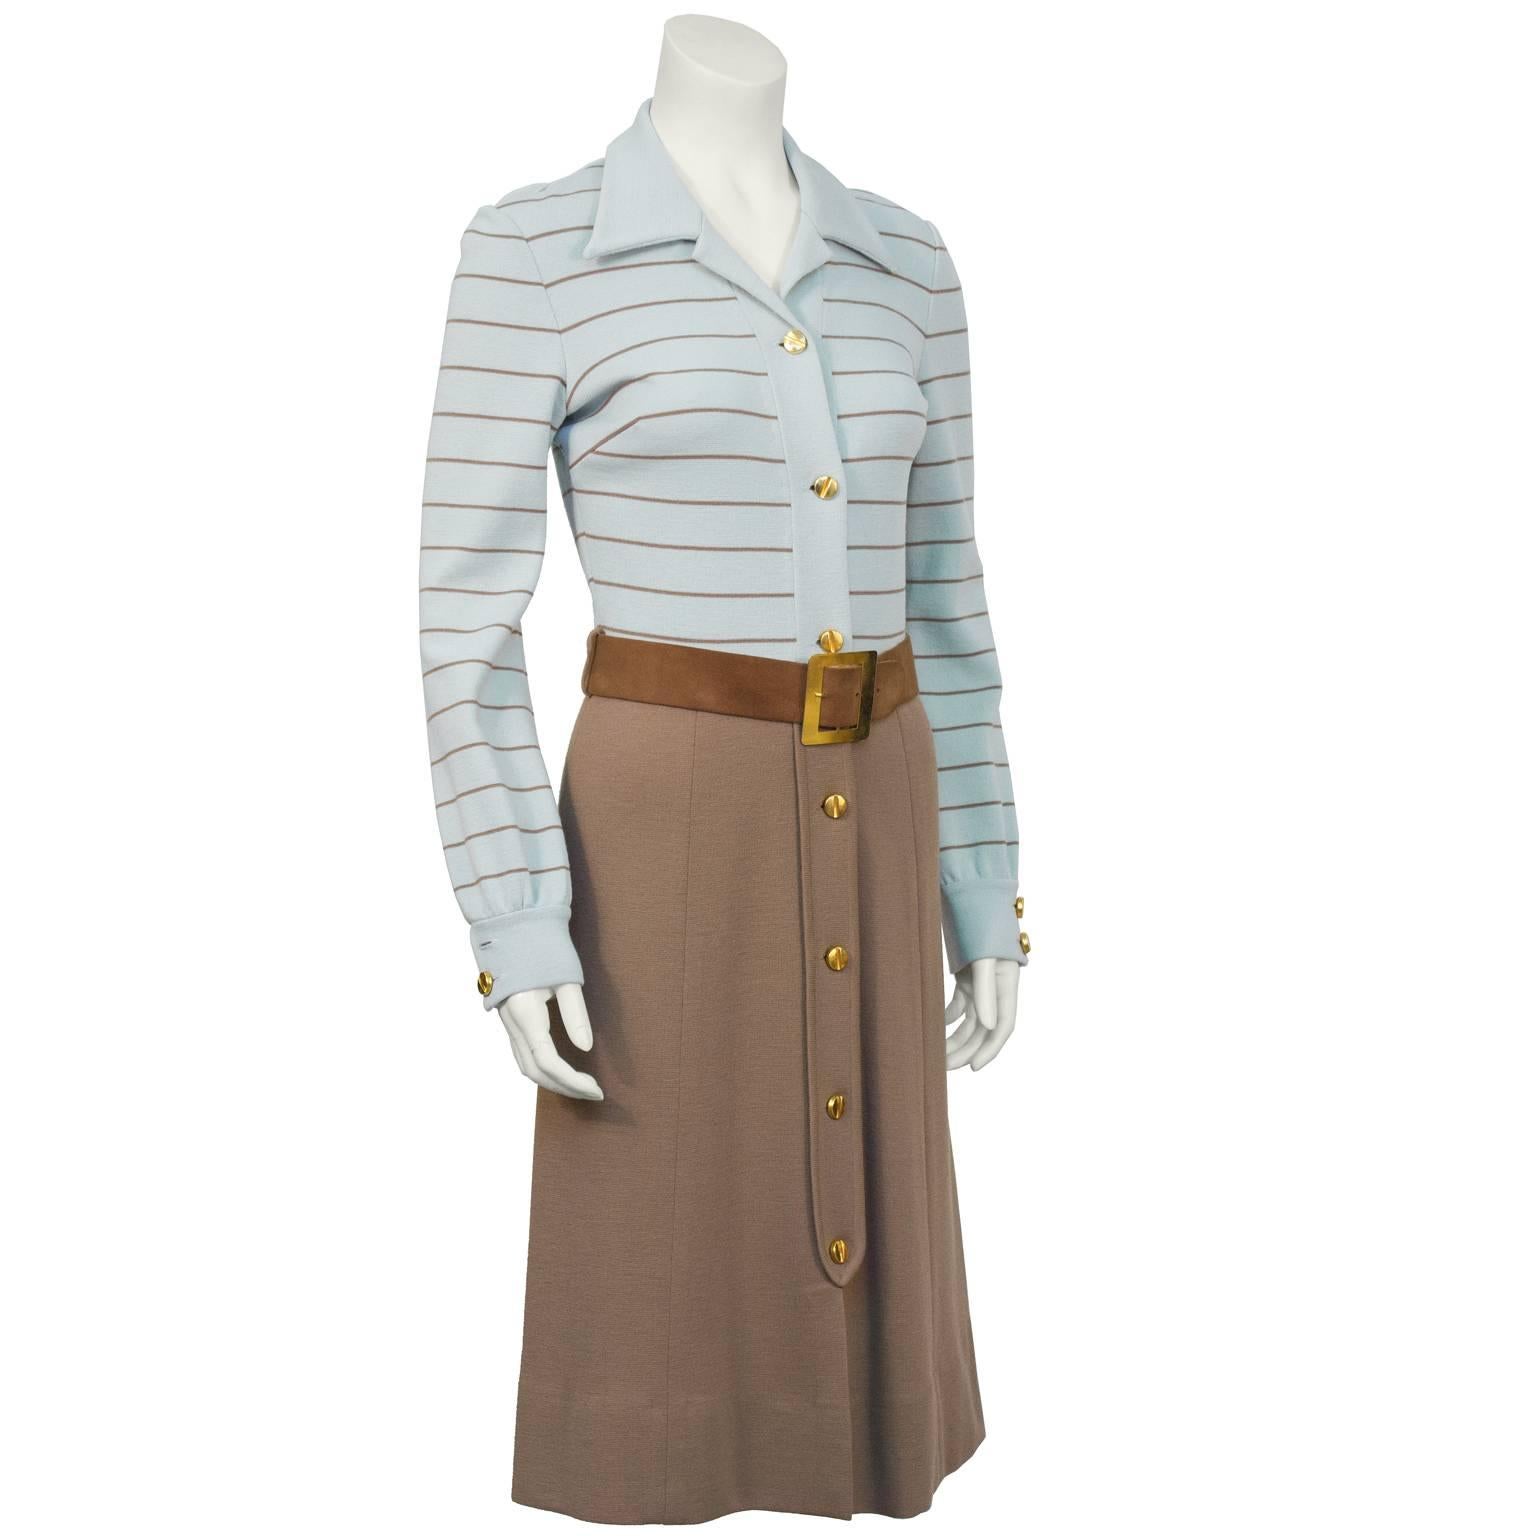 Classic Italian designed 1960's blue and brown A-line knit day dress with matching brown suede belt. The effortless ensemble has a baby blue knit bodice with brown stripes, a notched lapel and bust darts. The taupe brown knit skirt starts at the